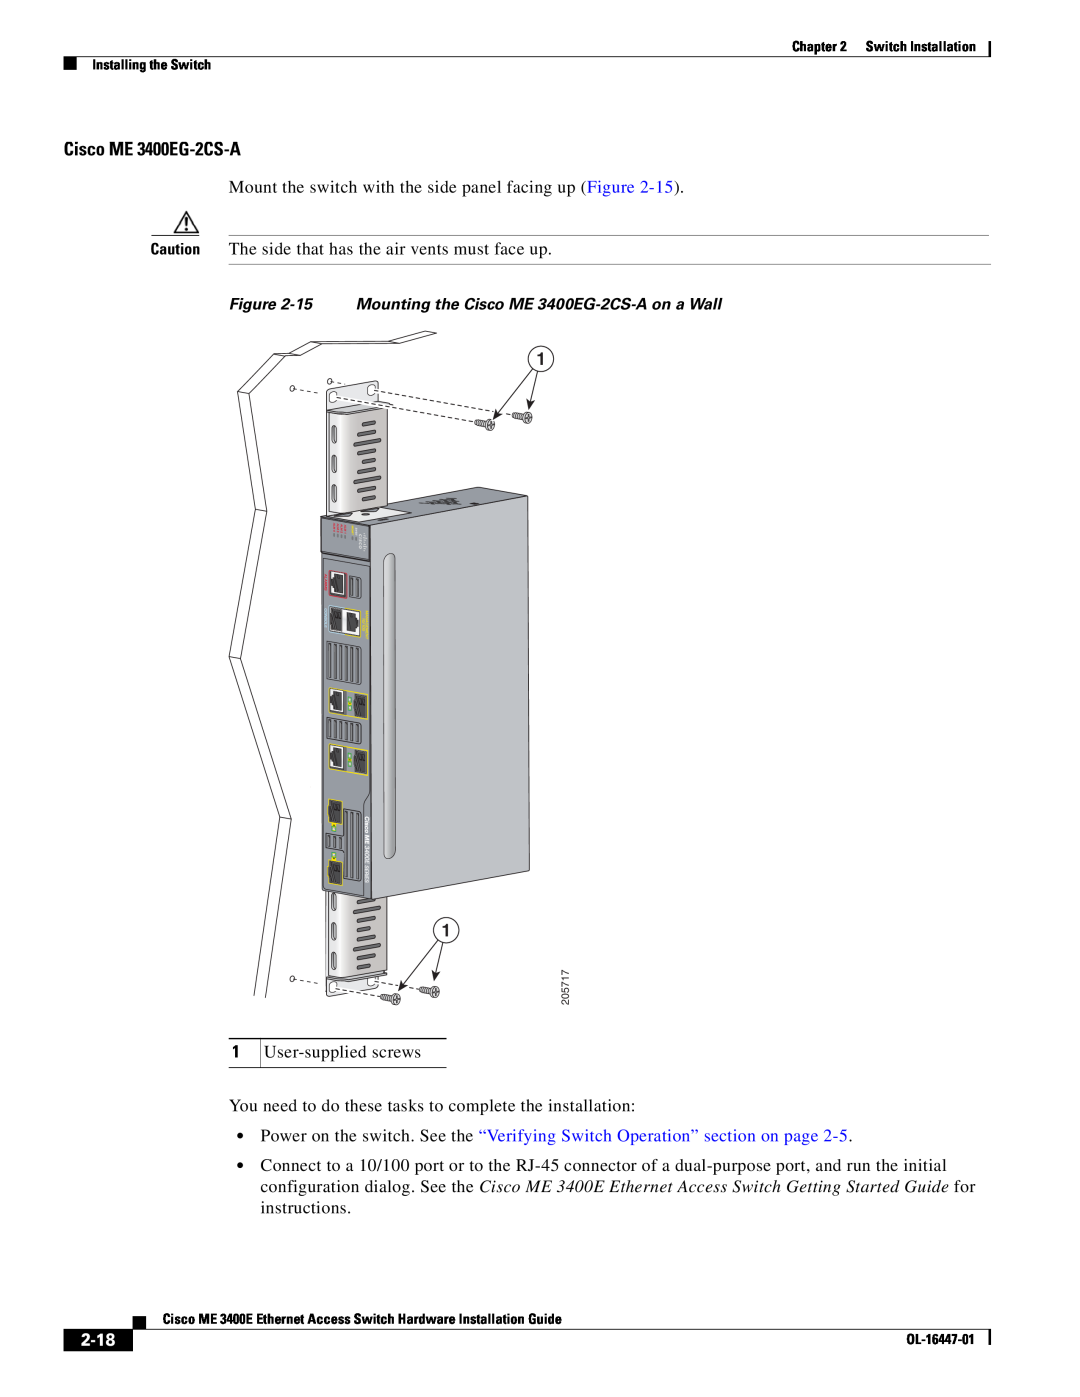 Cisco Systems OL-16447-01 manual 2-18, 15 Mounting the Cisco ME 3400EG-2CS-A on a Wall 